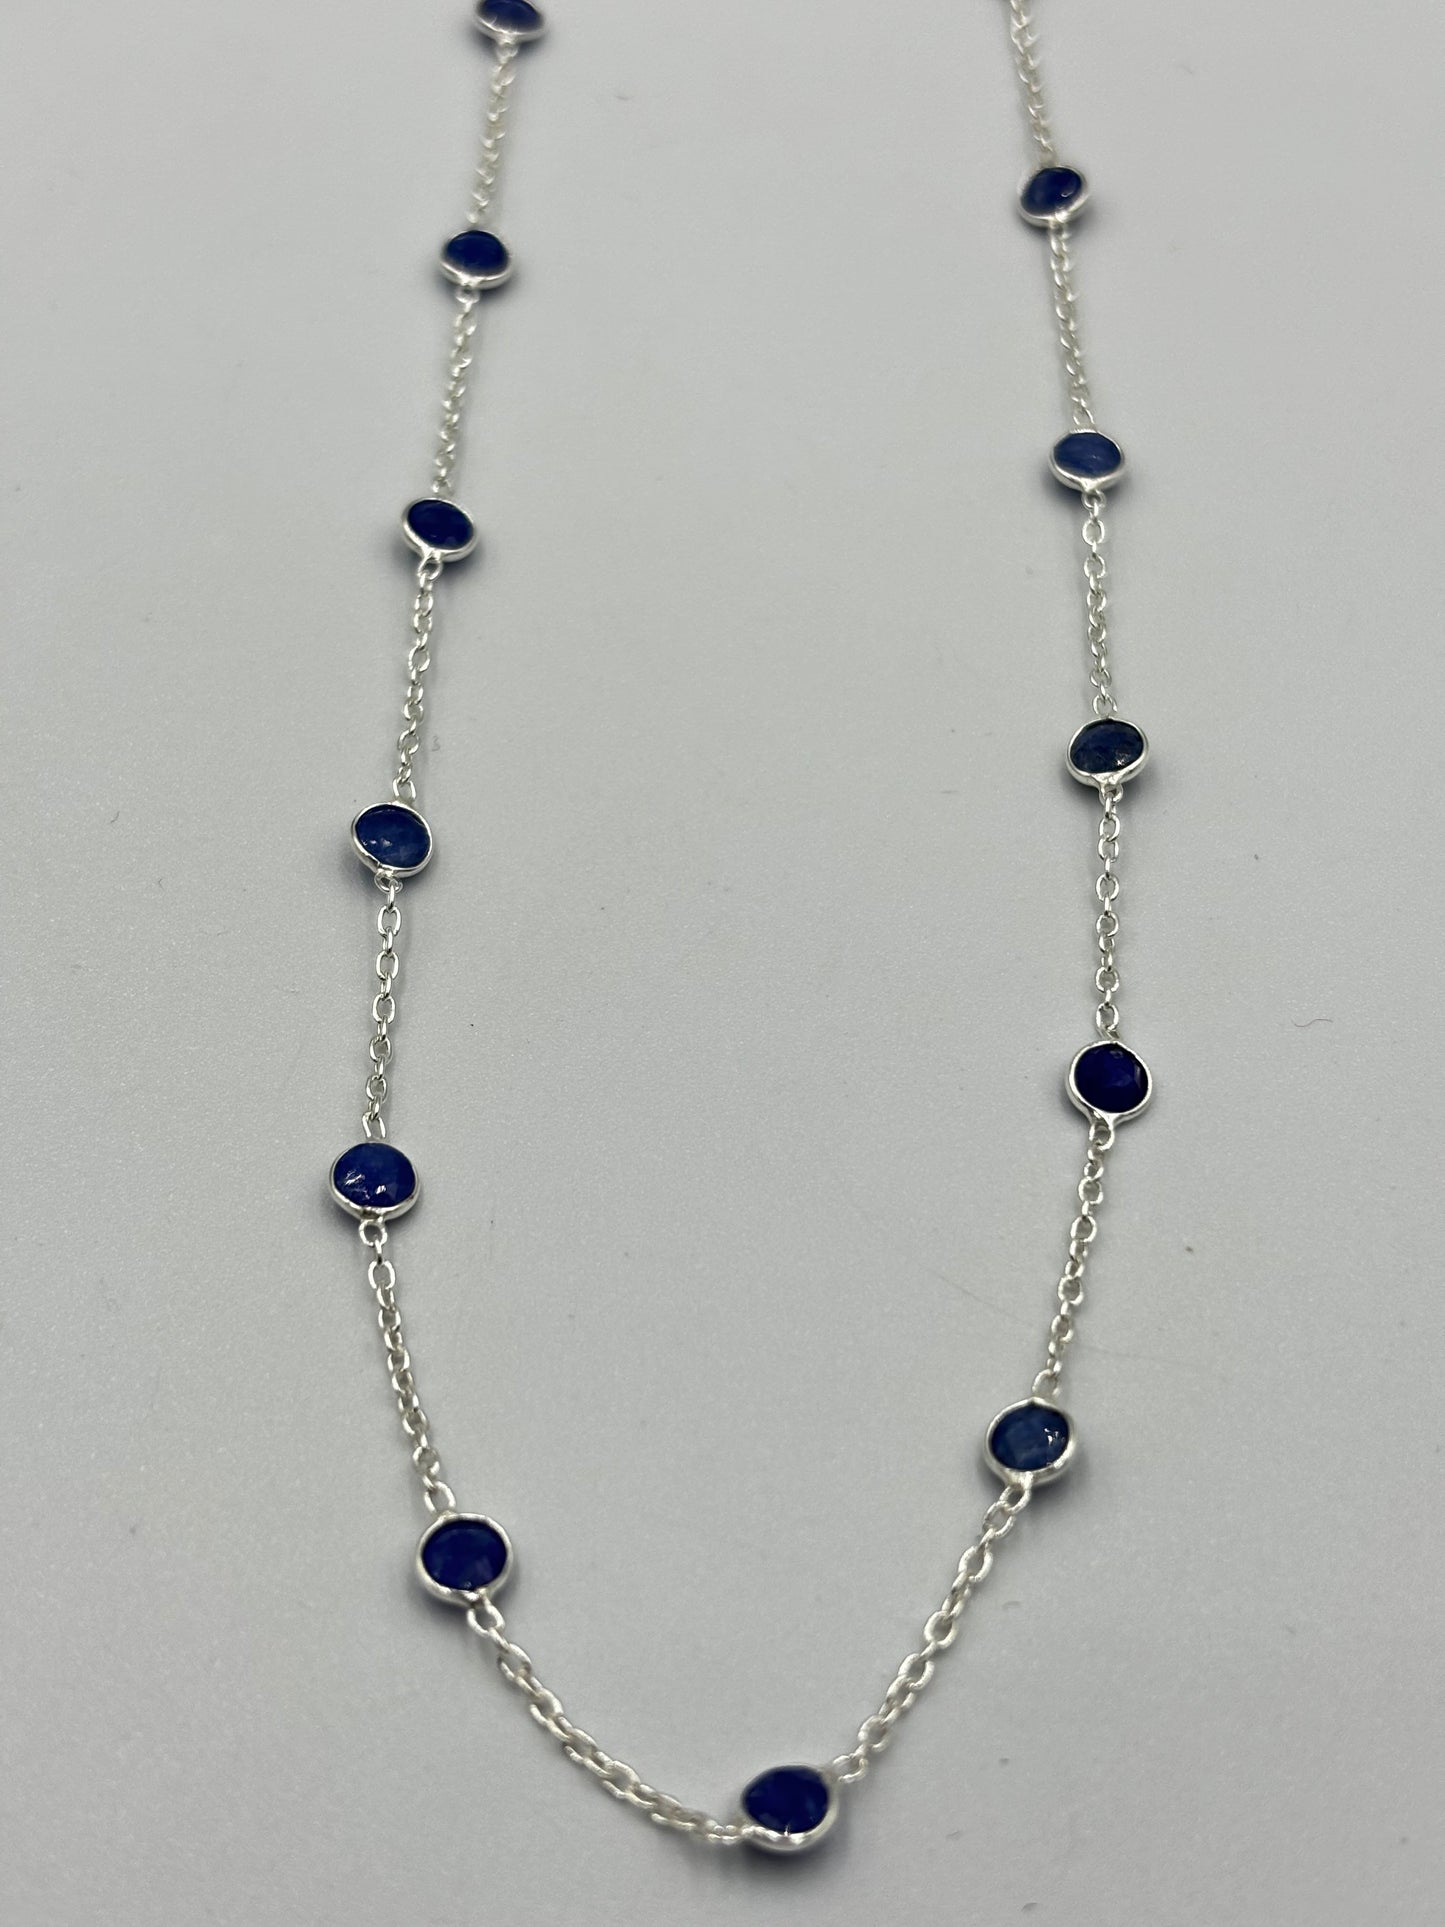 Sterling silver necklace with blue 5mm sapphire semi precious stones in-bedded in necklace